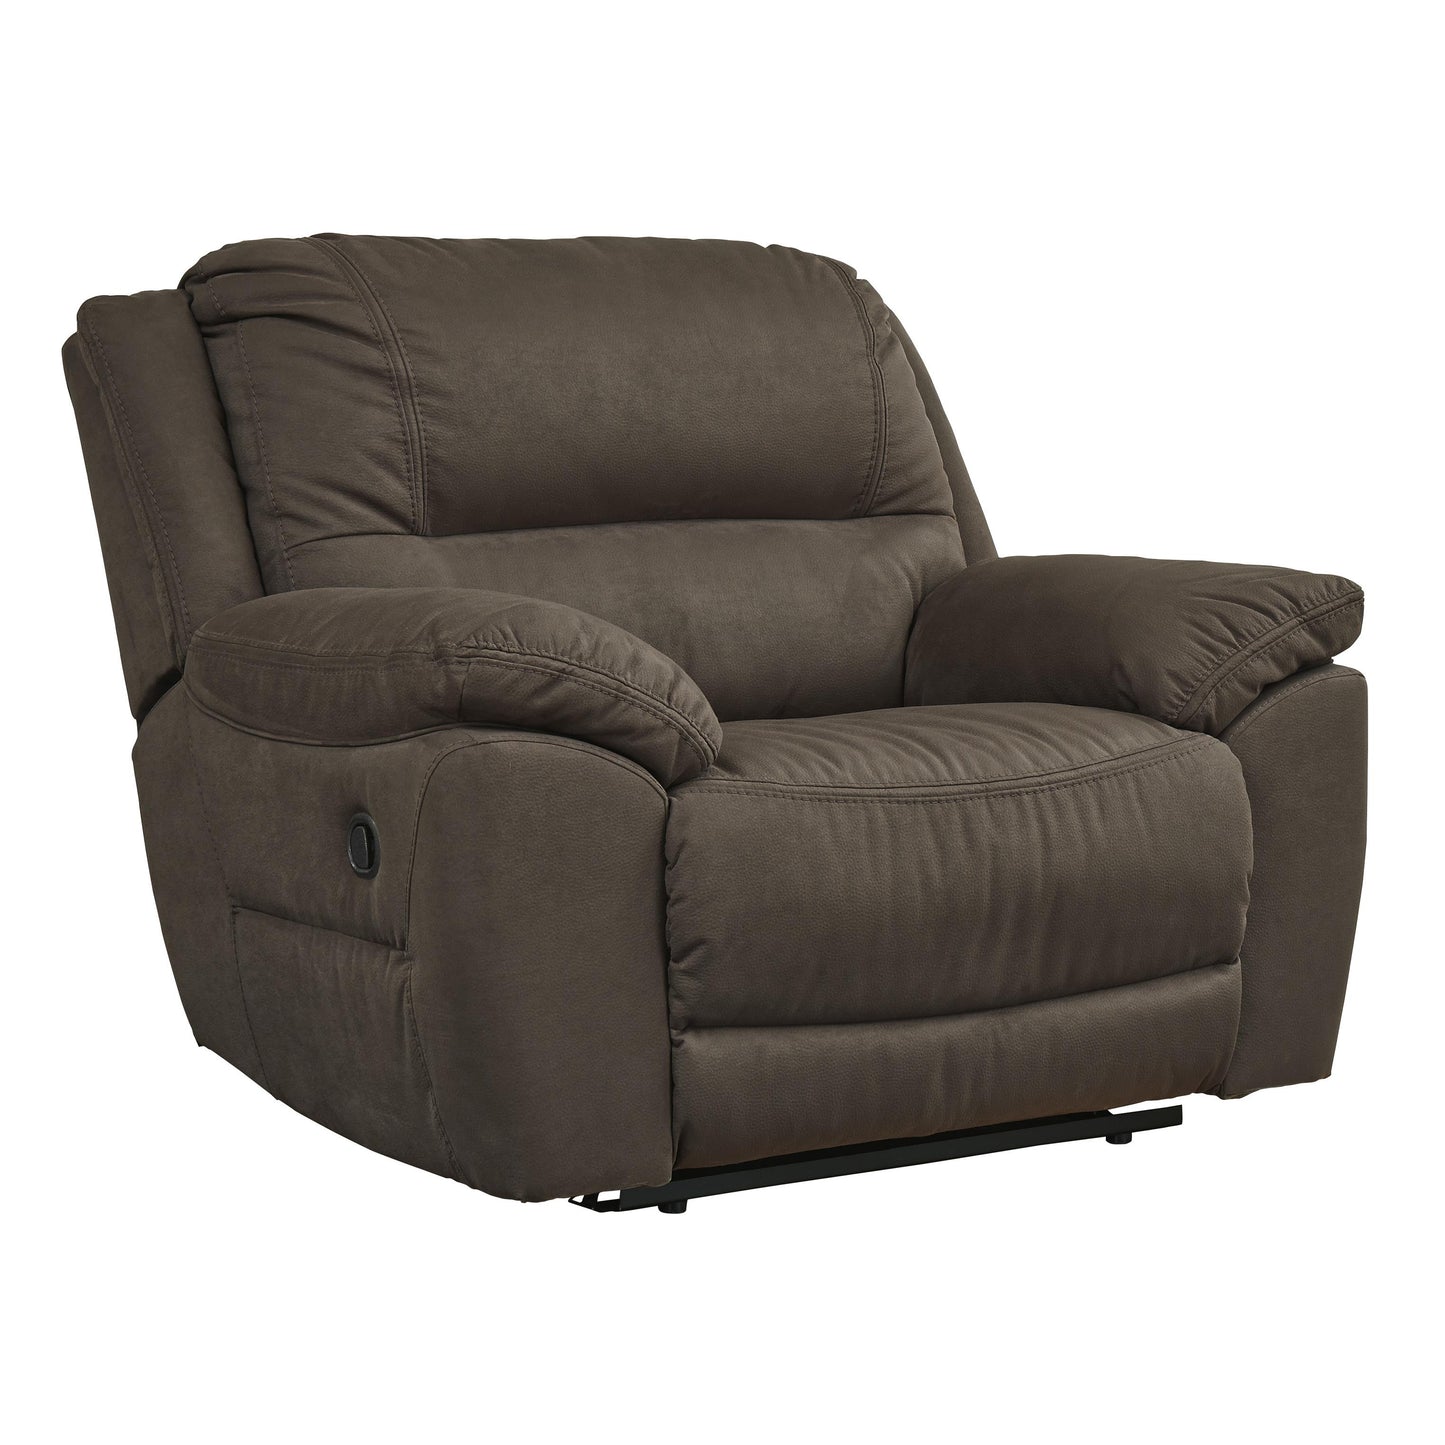 Signature Design by Ashley Next-Gen Gaucho Leather Look Recliner with Wall Recline 5420452 IMAGE 1